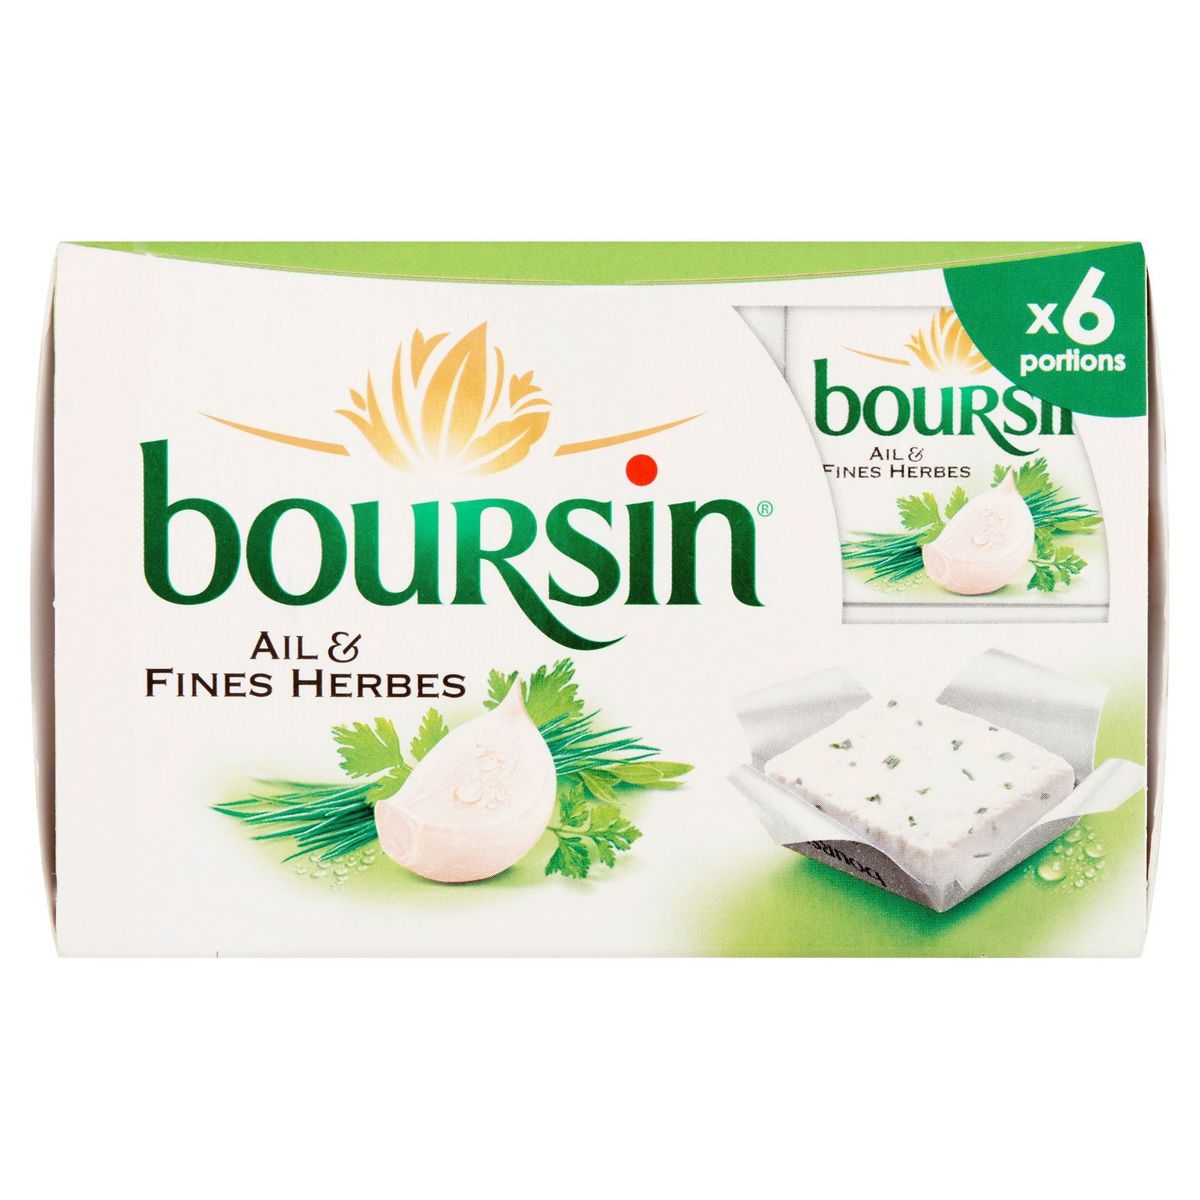 Boursin Fromage frais Ail & Fines Herbes 6 portions 96 g